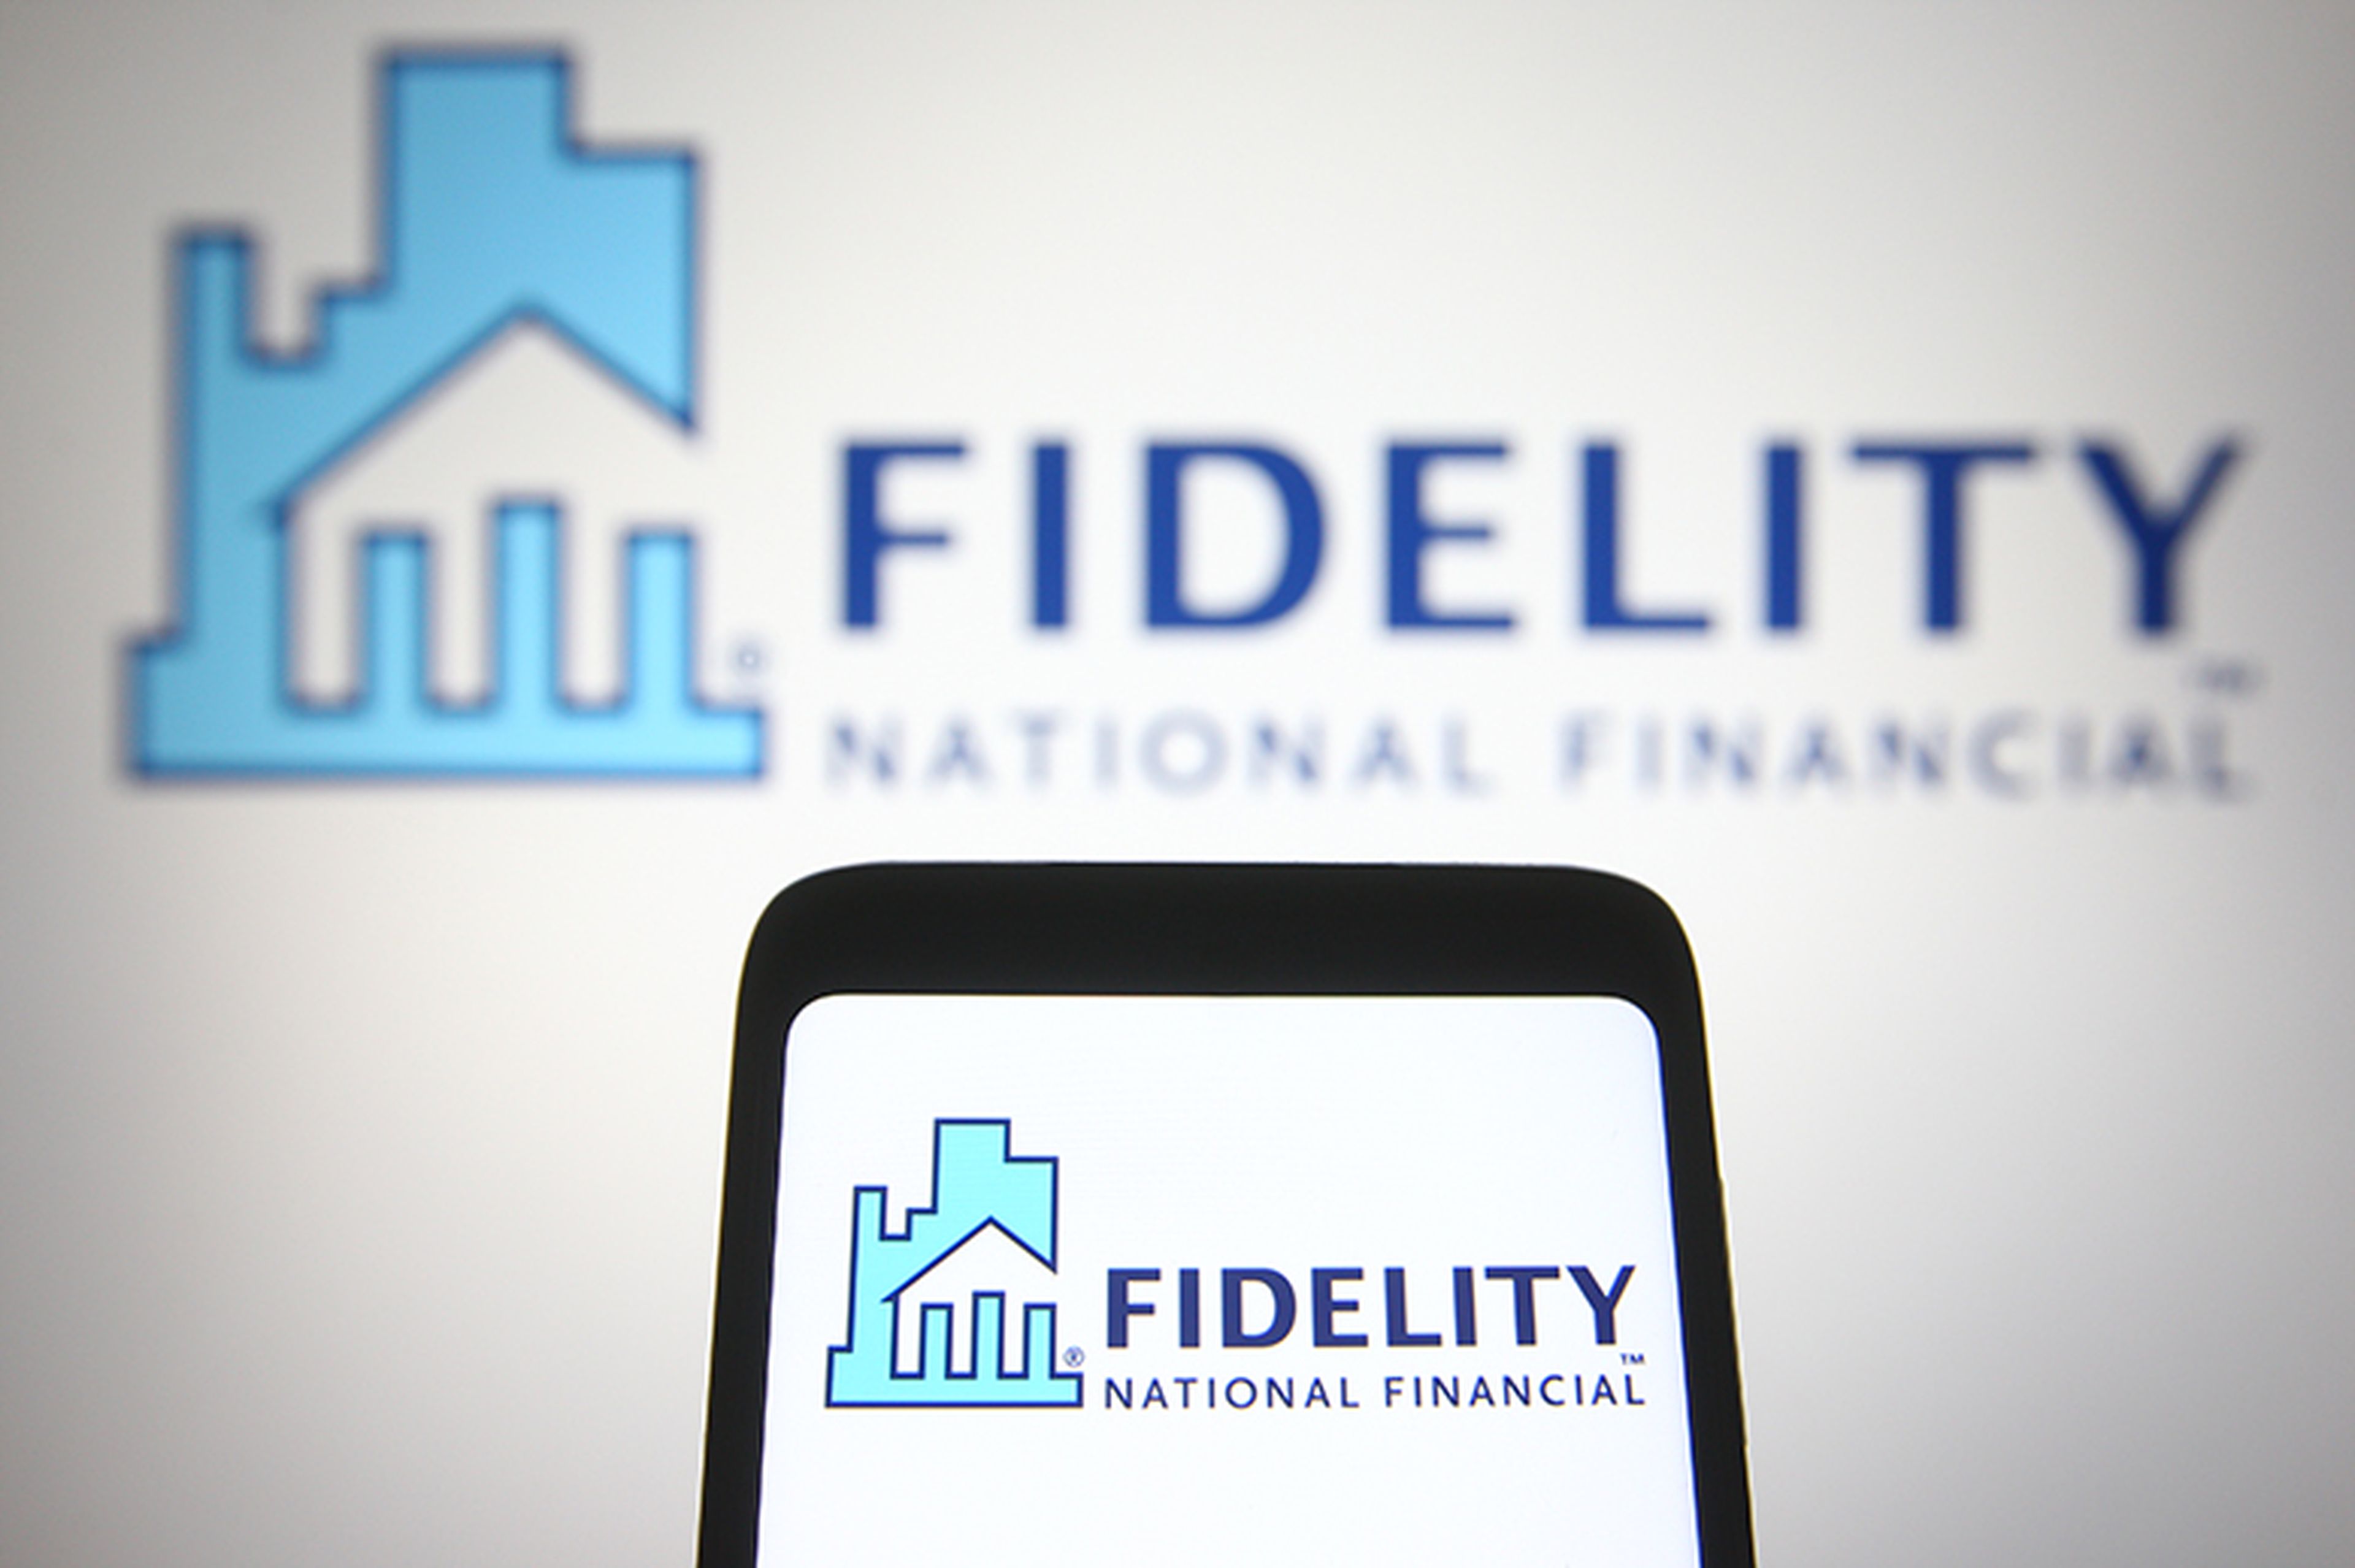 A Fidelity National Financial (FNF) logo is seen on a smartphone and a PC screen.